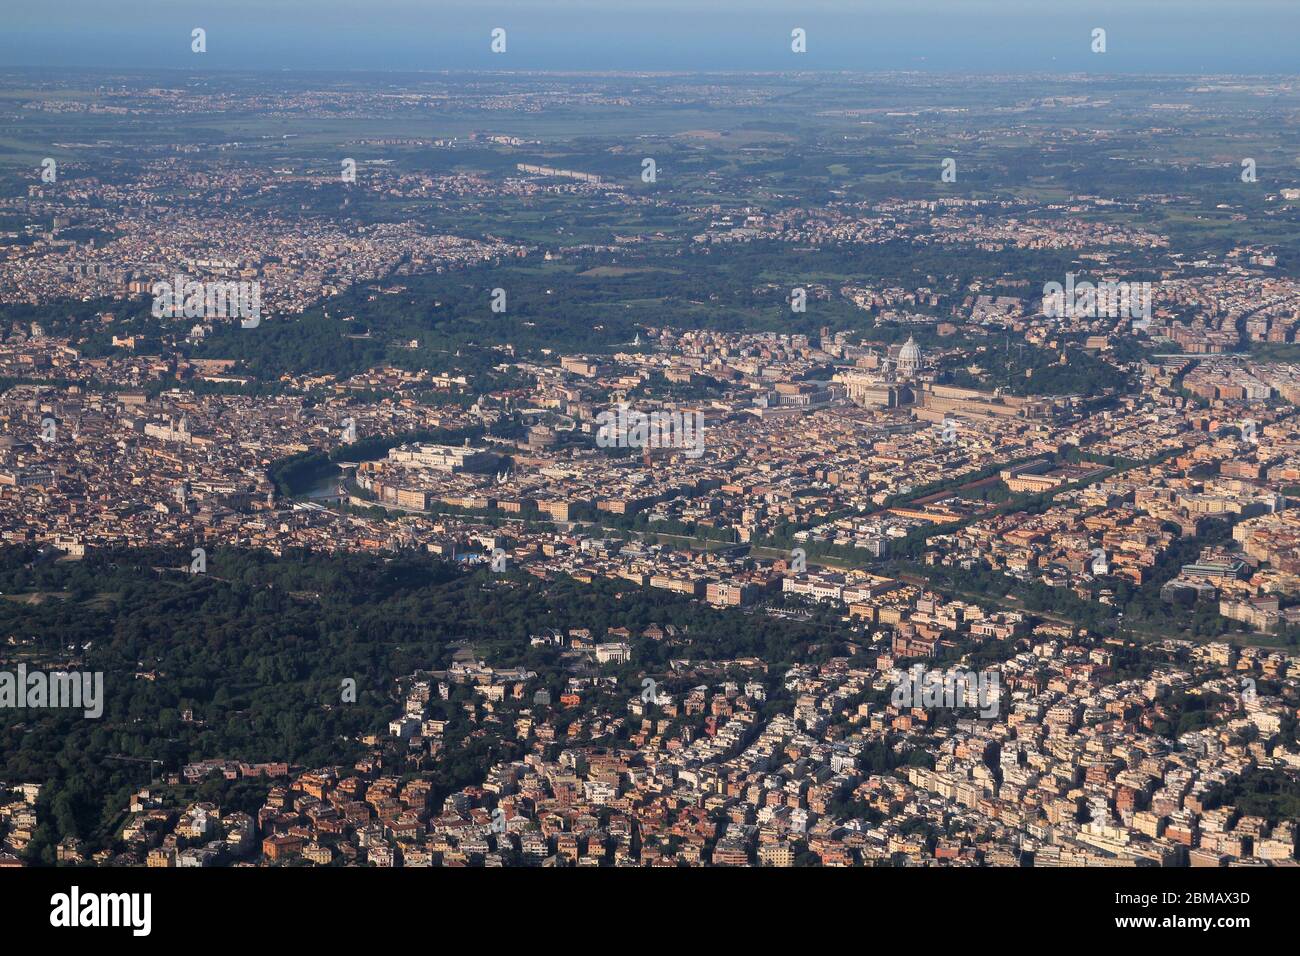 Rome, Italy - aerial view with Tiber river and famous stadium visible. Stock Photo